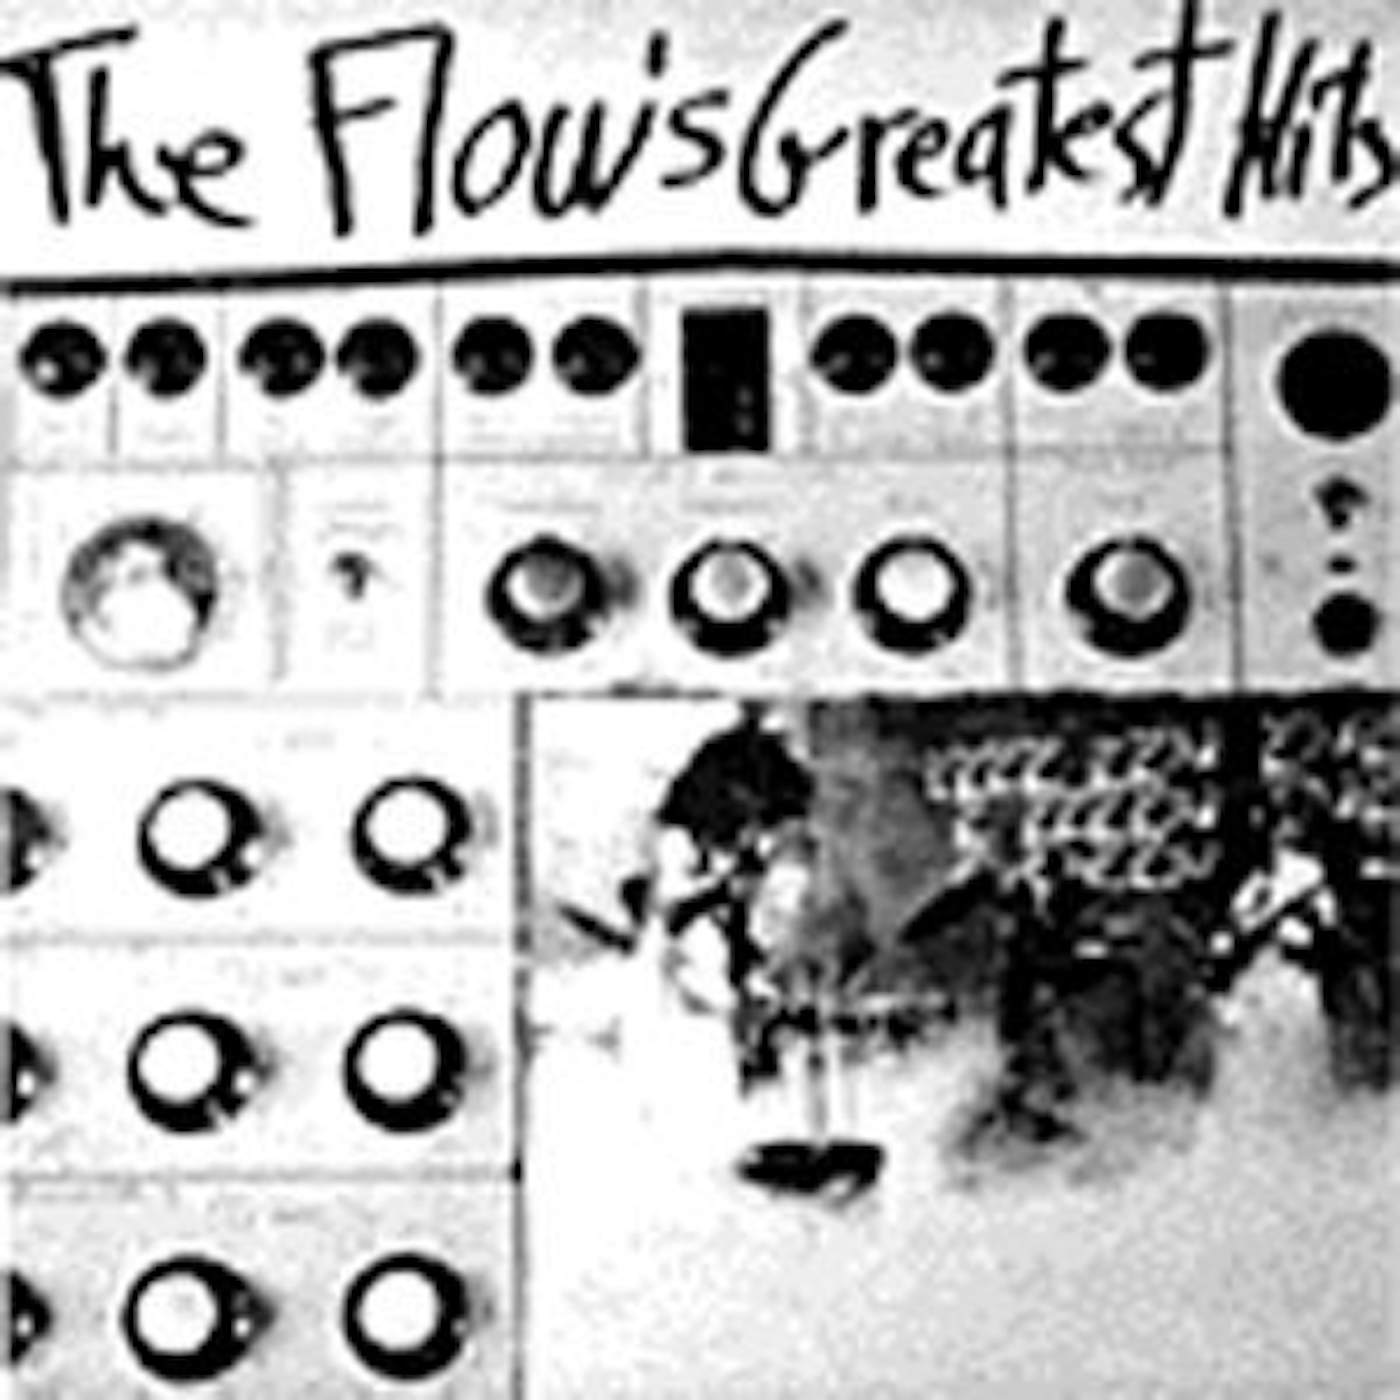 The Flow GREATEST HITS CD